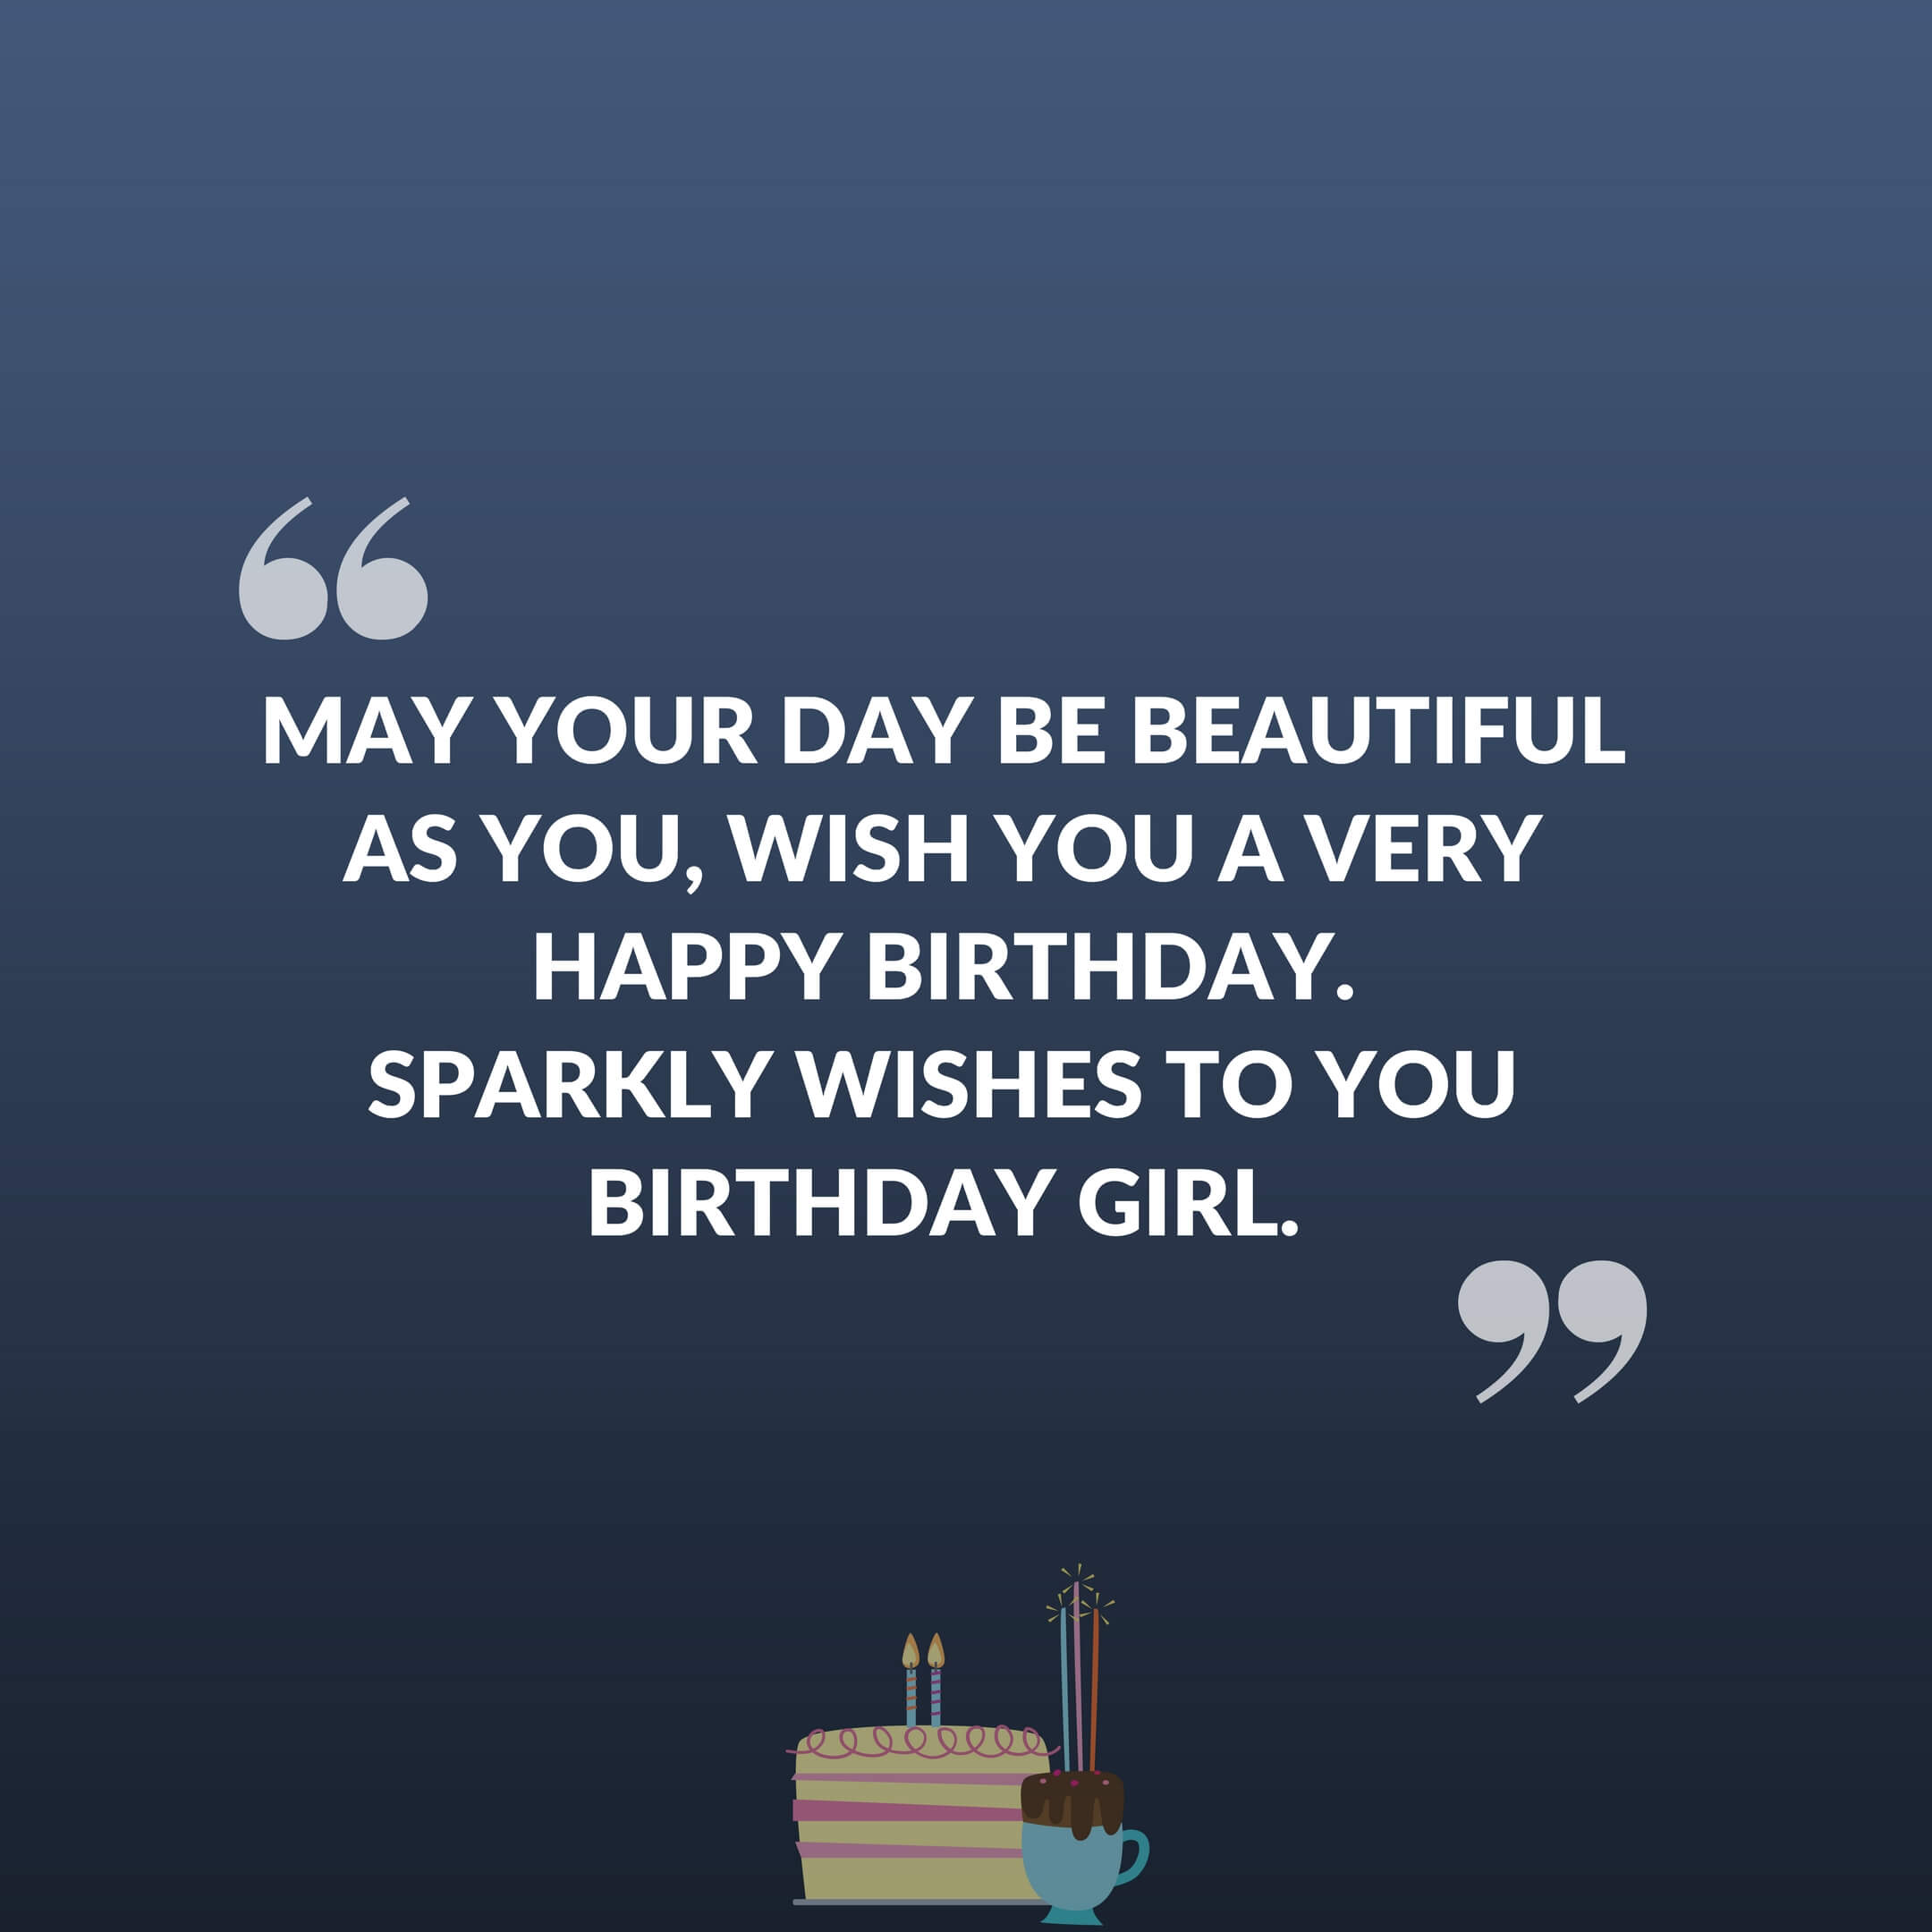 May your day be beautiful as you,wish you a very happy birthday. sparkly wishes to you birthday girl.